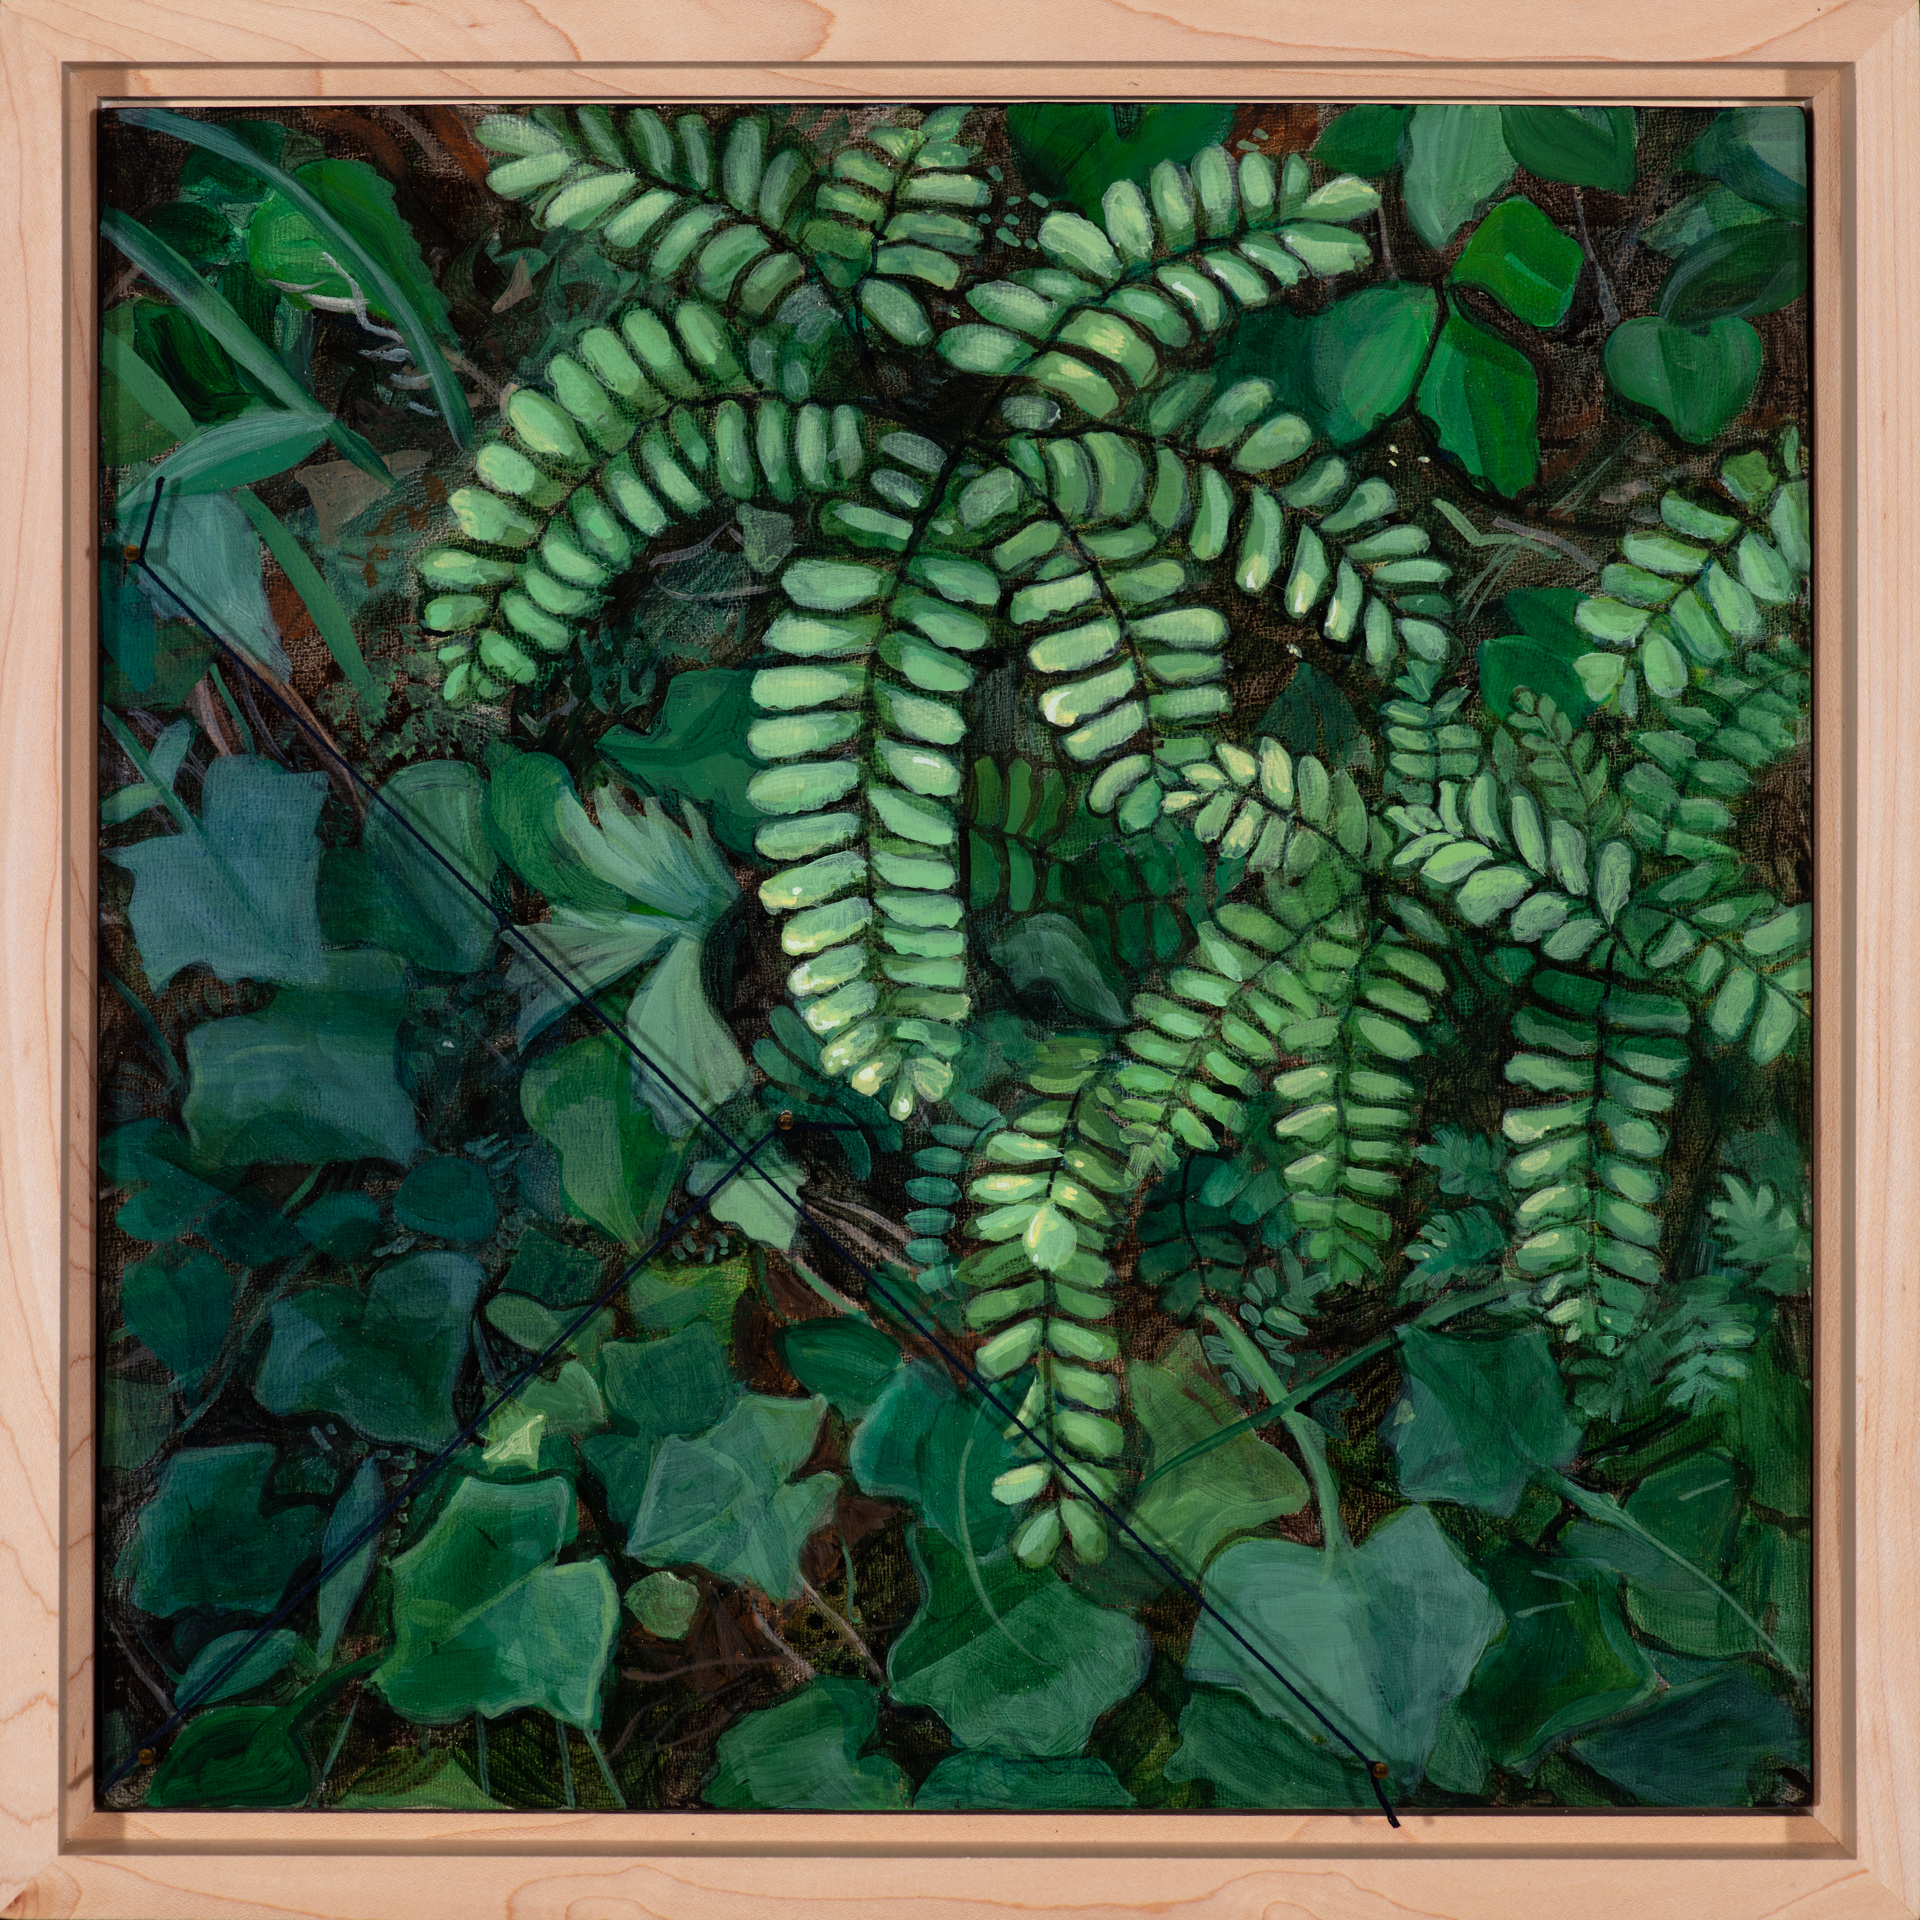 Angel Hair fern in shadow, acrylic on cradled board, embroidery floss, brass nails, 12”   x12”